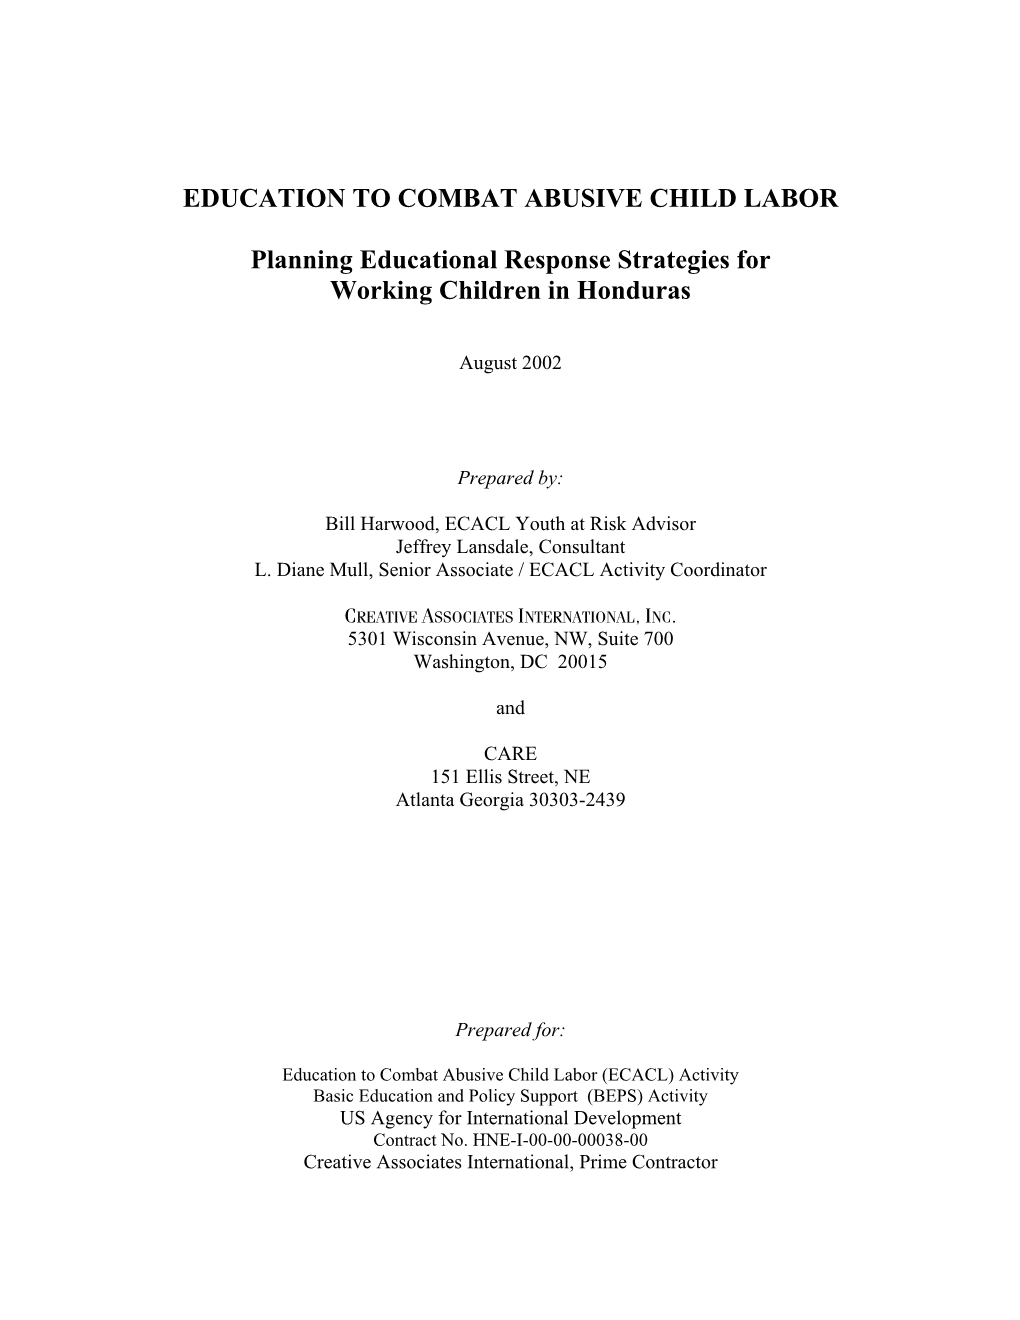 Education to Combat Abusive Child Labor: Planning Educational Response Strategies for Working Children in Honduras